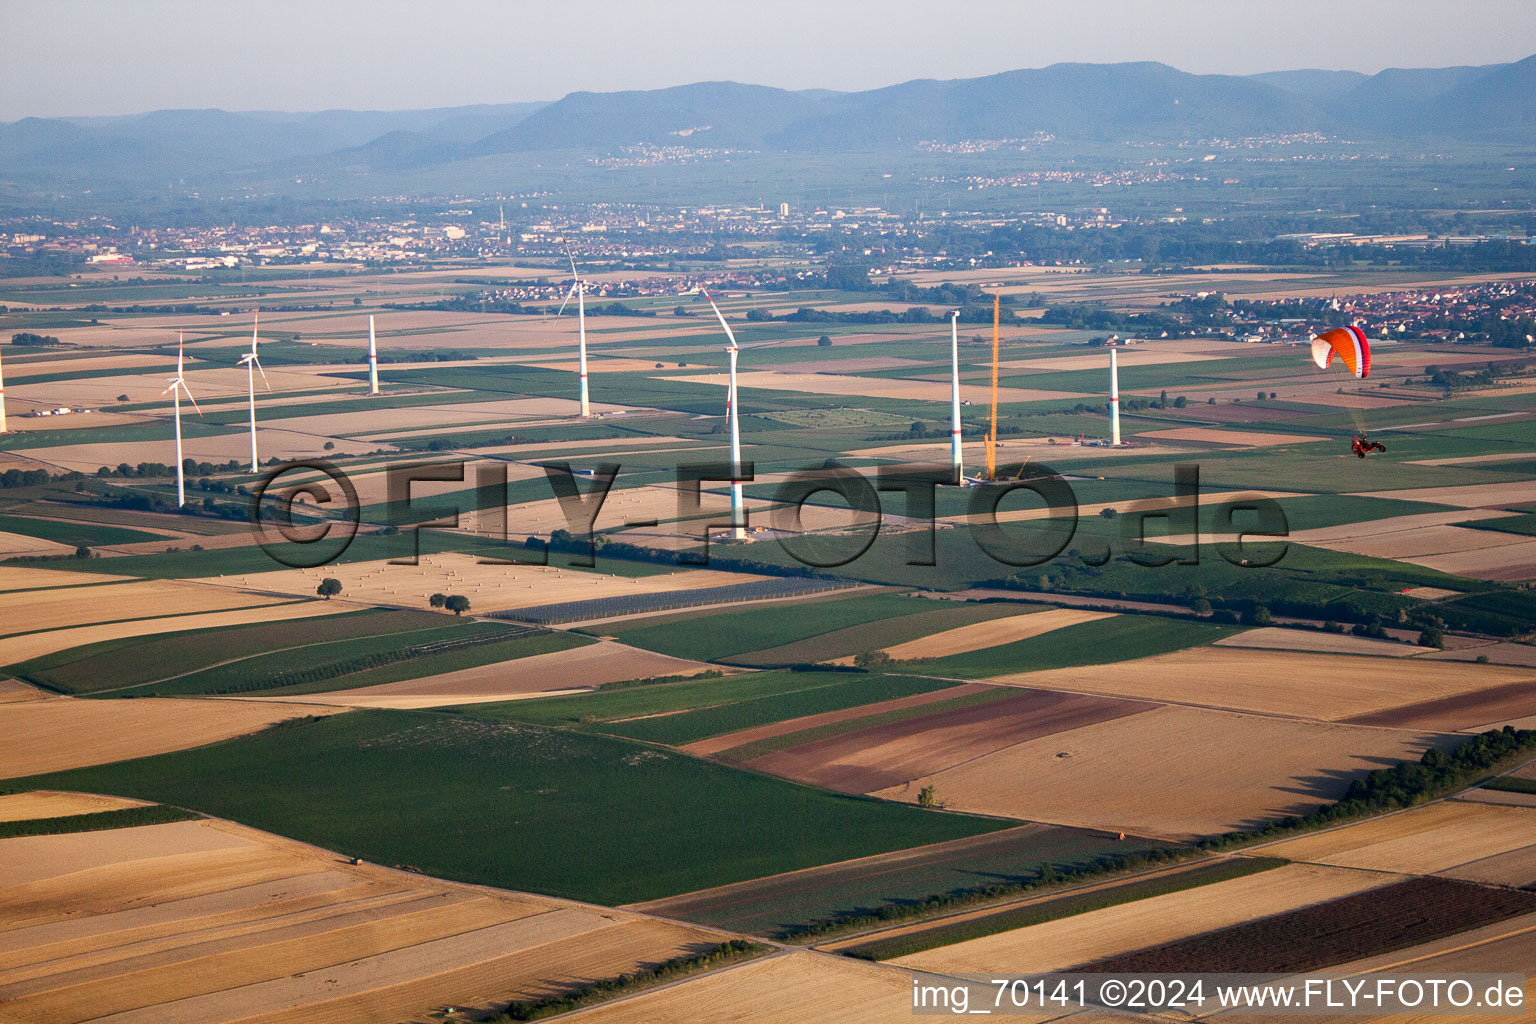 Oblique view of Wind farm in Offenbach an der Queich in the state Rhineland-Palatinate, Germany